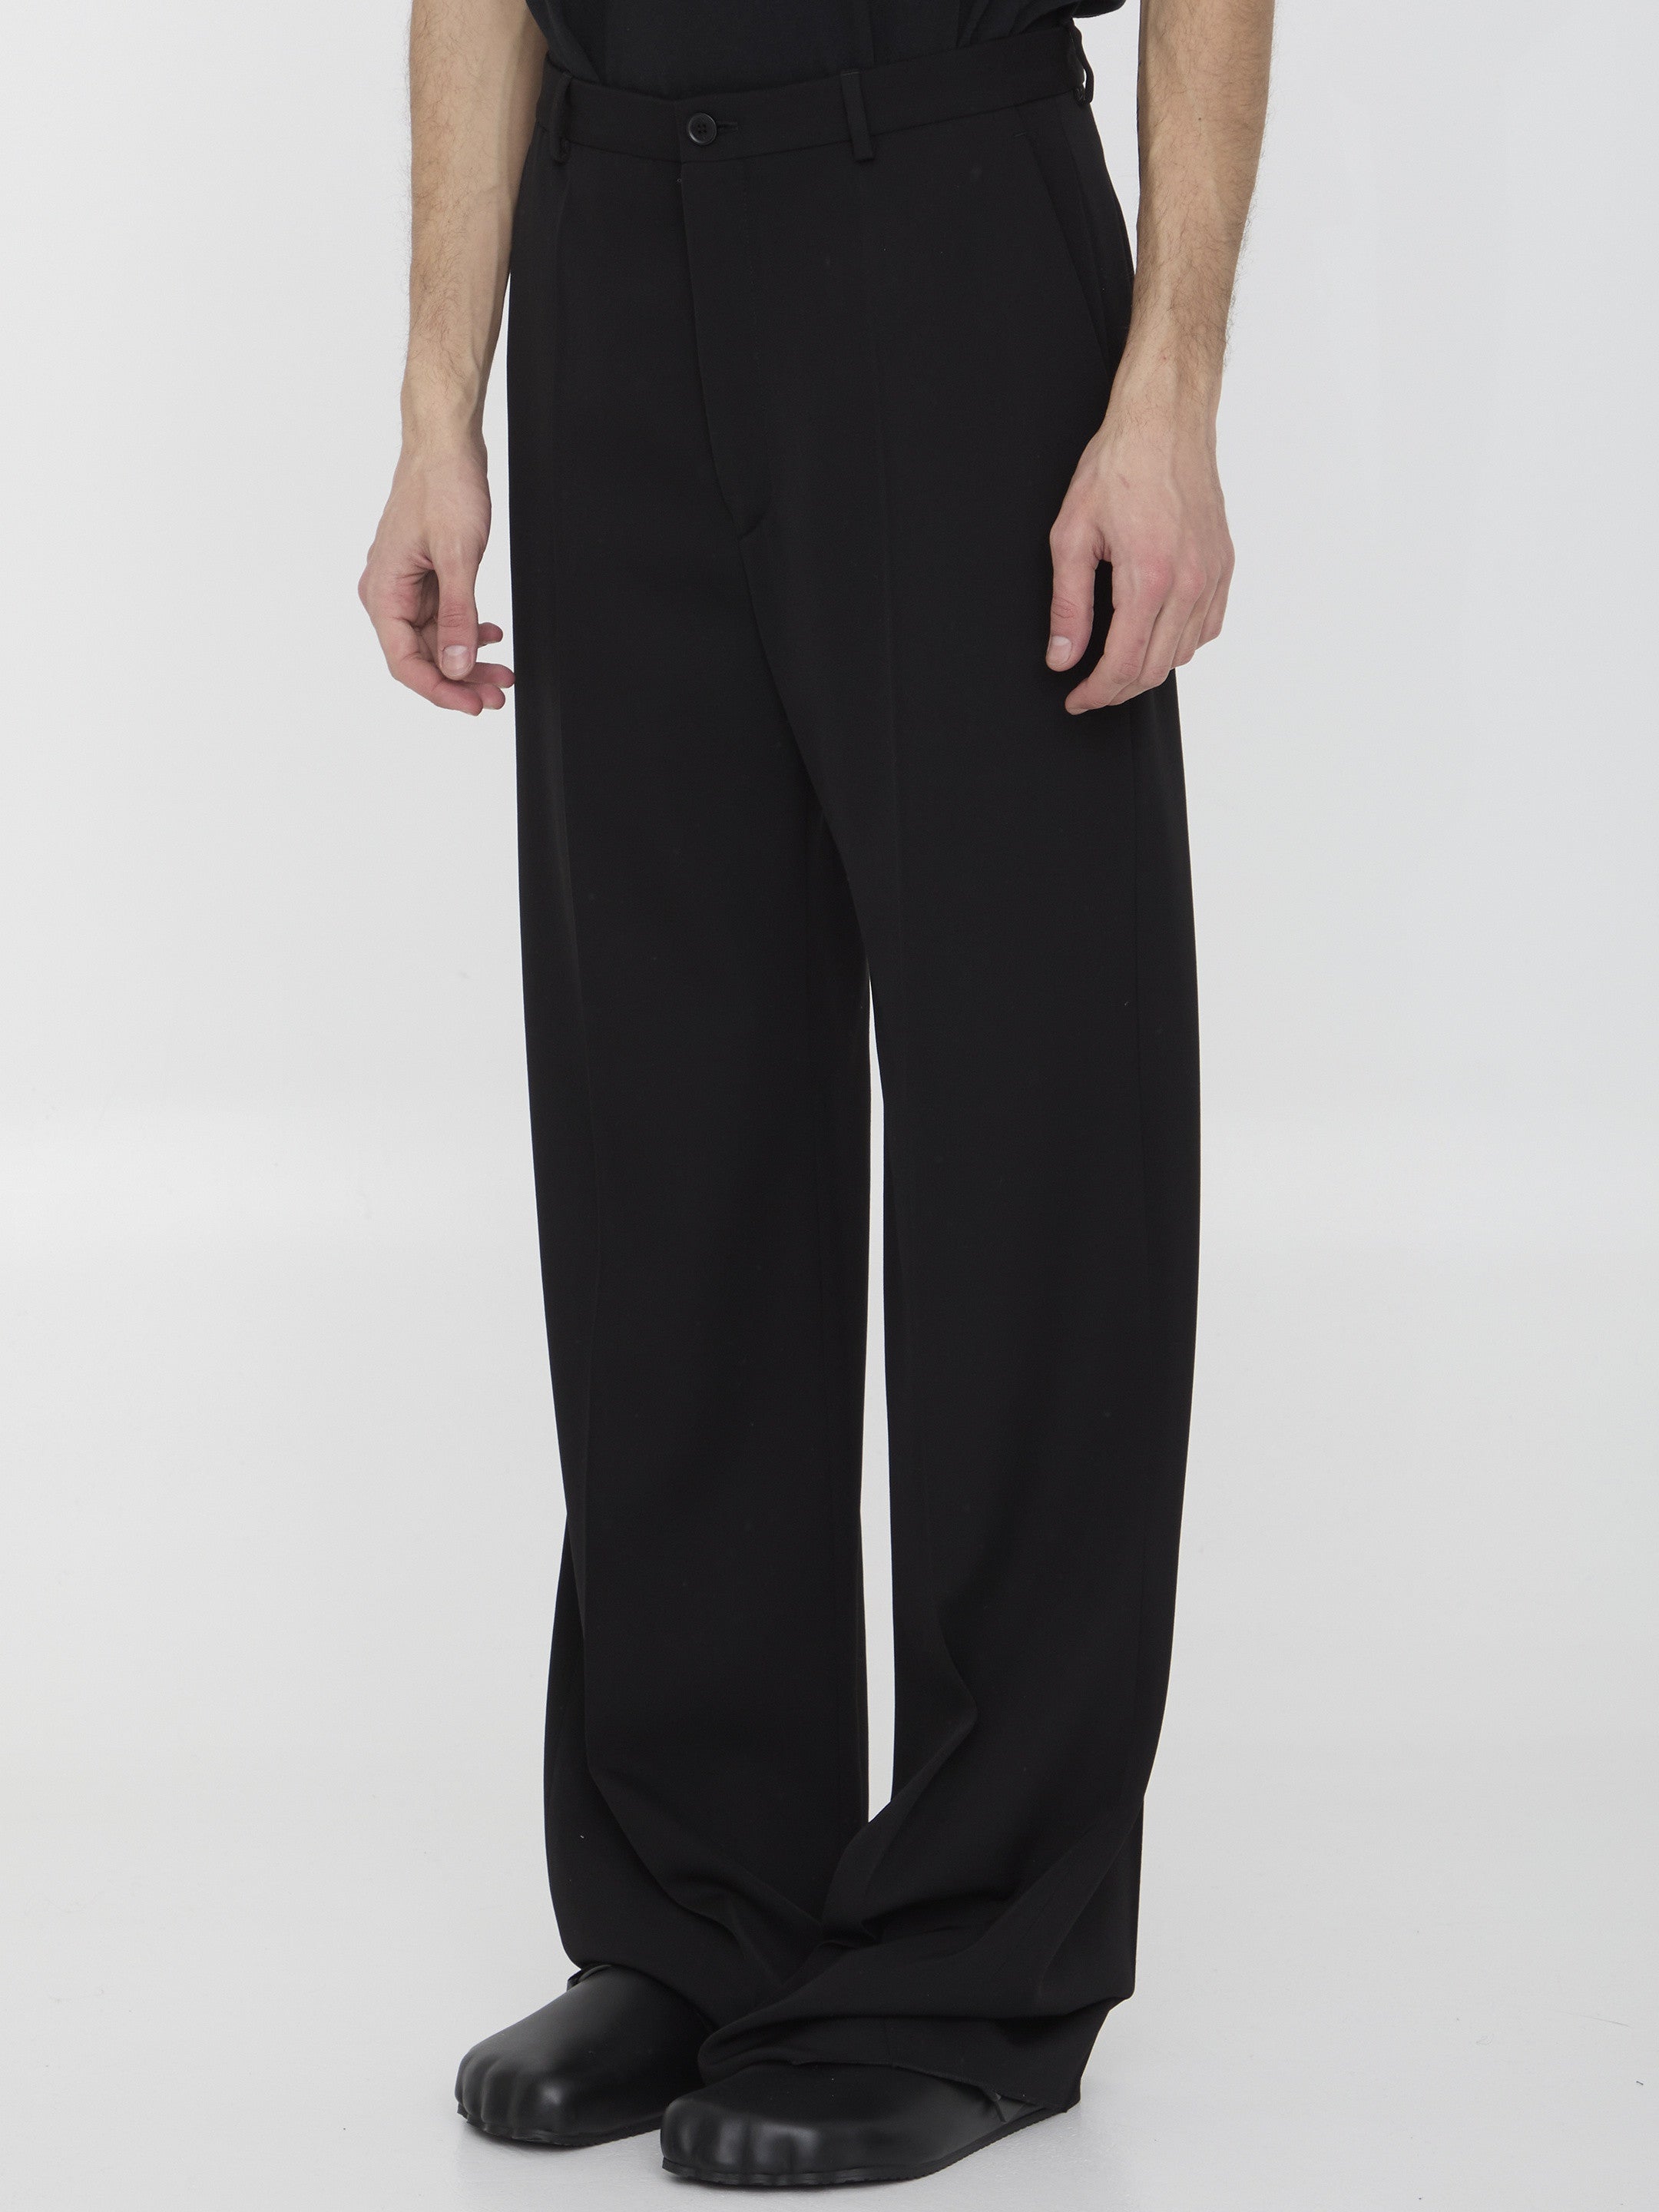 BALENCIAGA-OUTLET-SALE-Tailored-trousers-Hosen-S-BLACK-ARCHIVE-COLLECTION-2.jpg